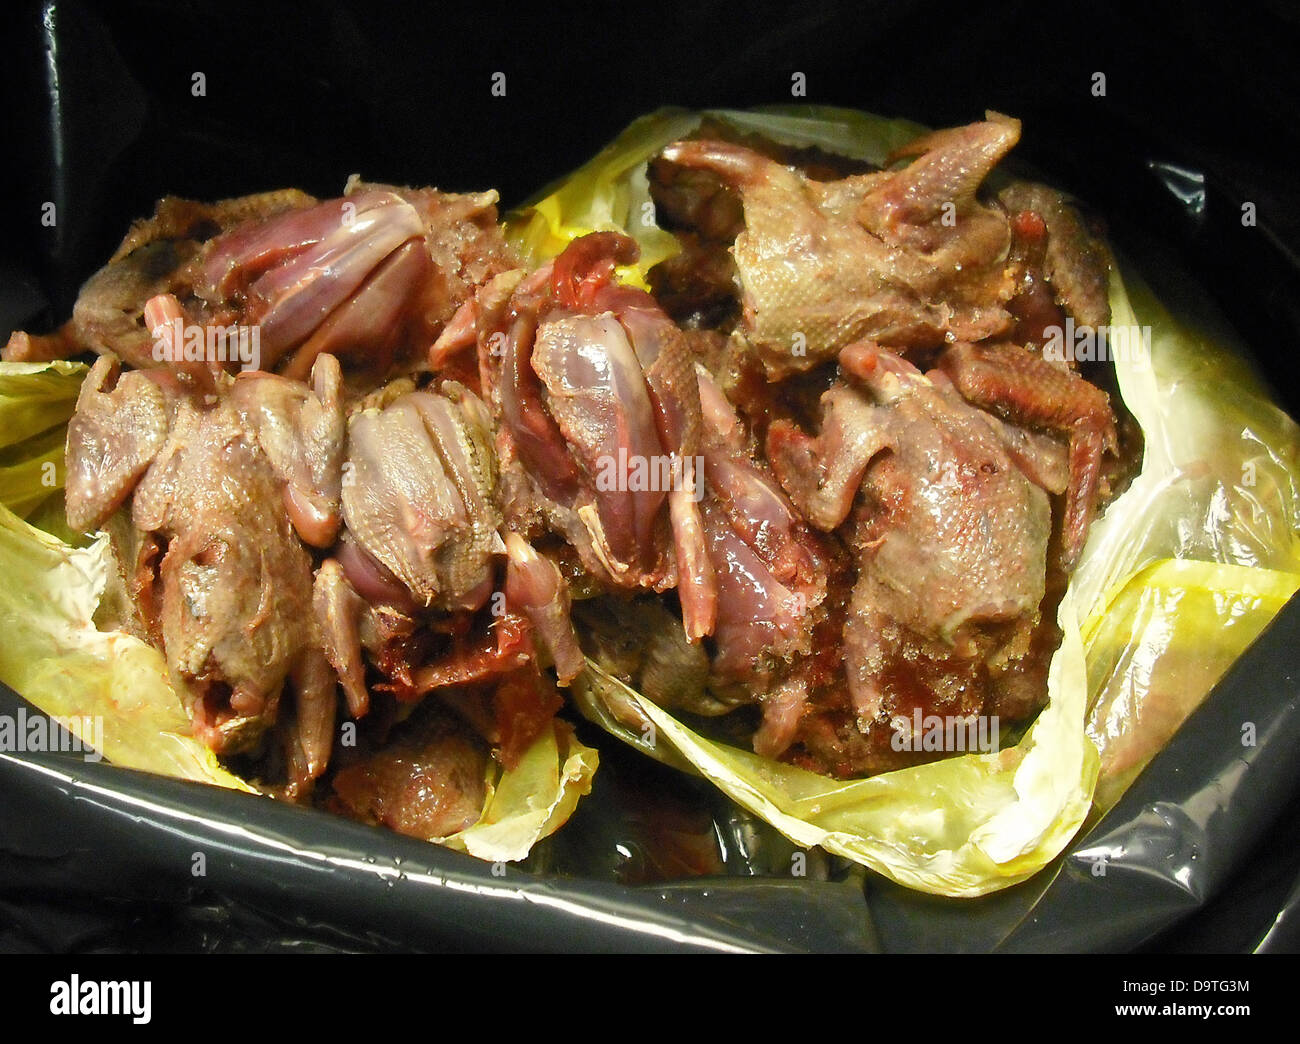 CBP Agriculture Specialists Seized Avian Carcasses in Bag at the San Diego Border. Stock Photo